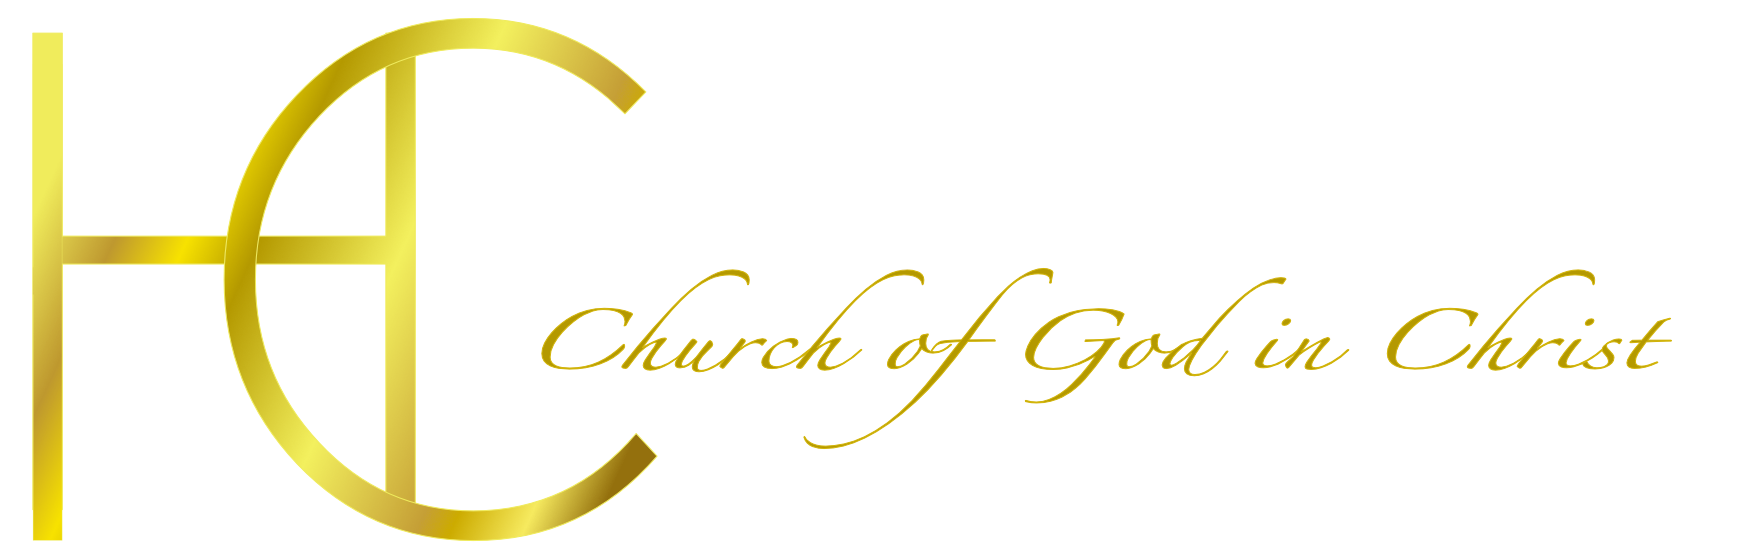 Holy Cathedral Church of God in Christ